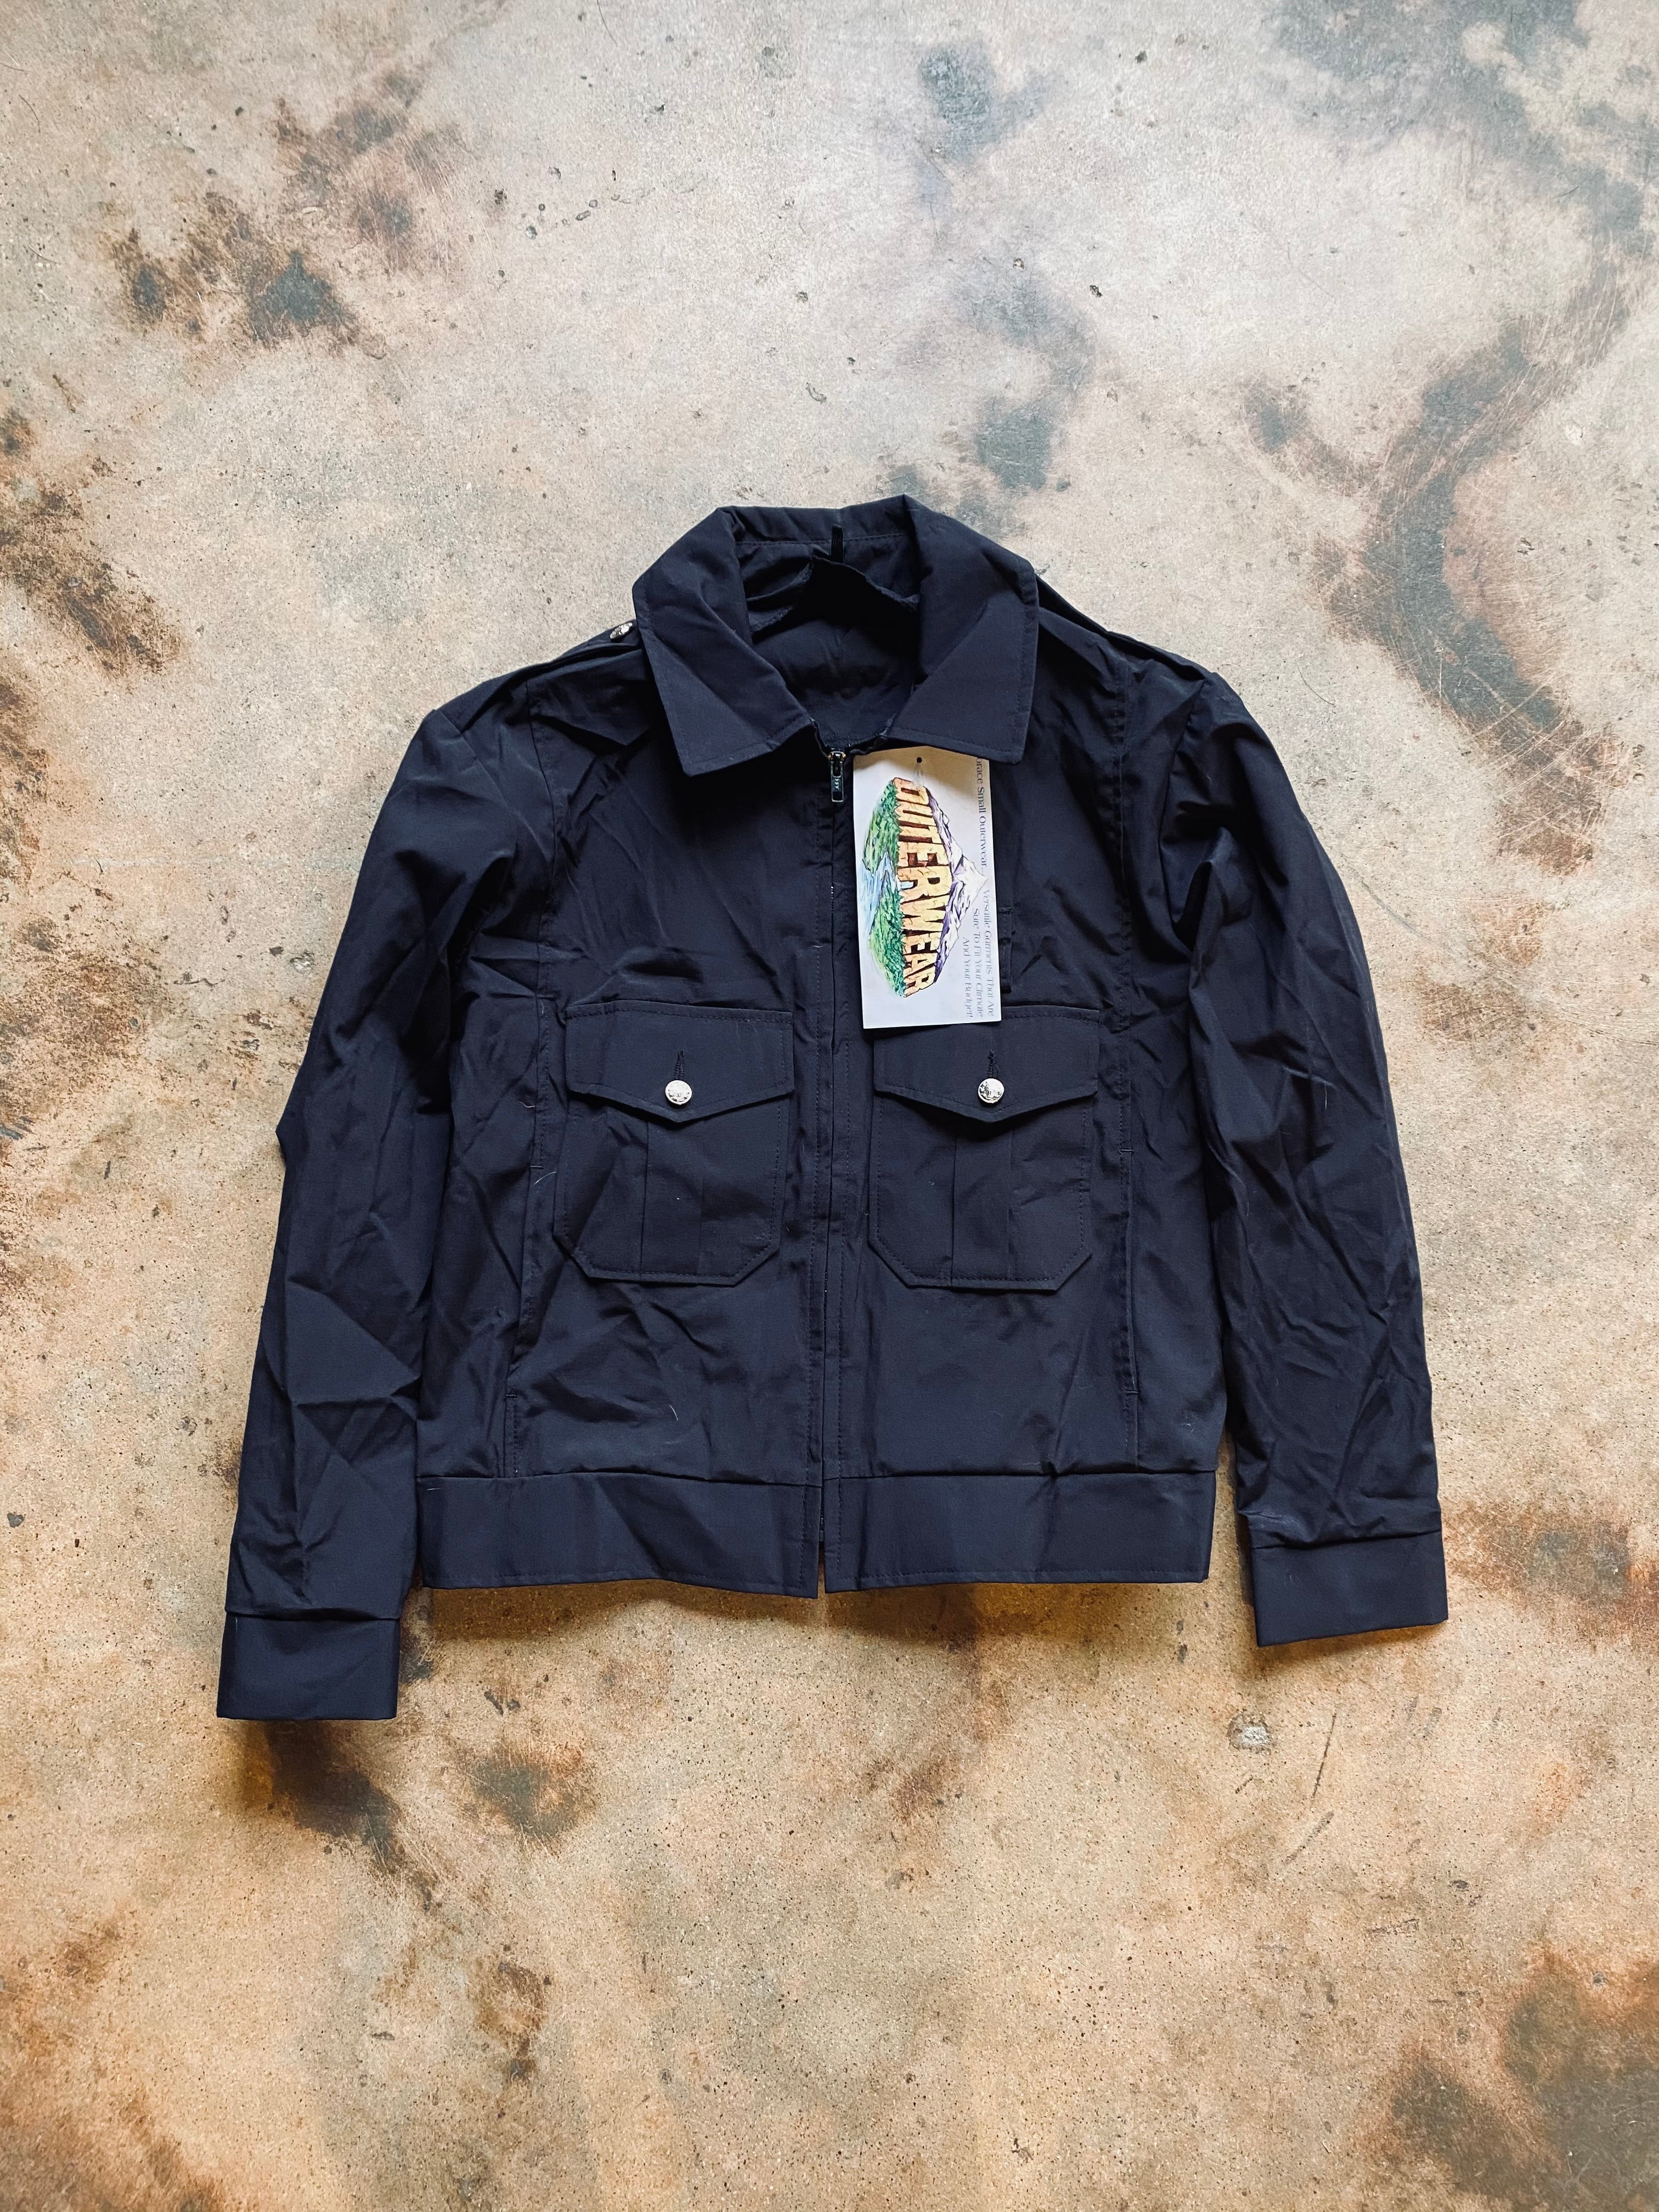 1997 Horace Small Apparel Co. Jacket | Small